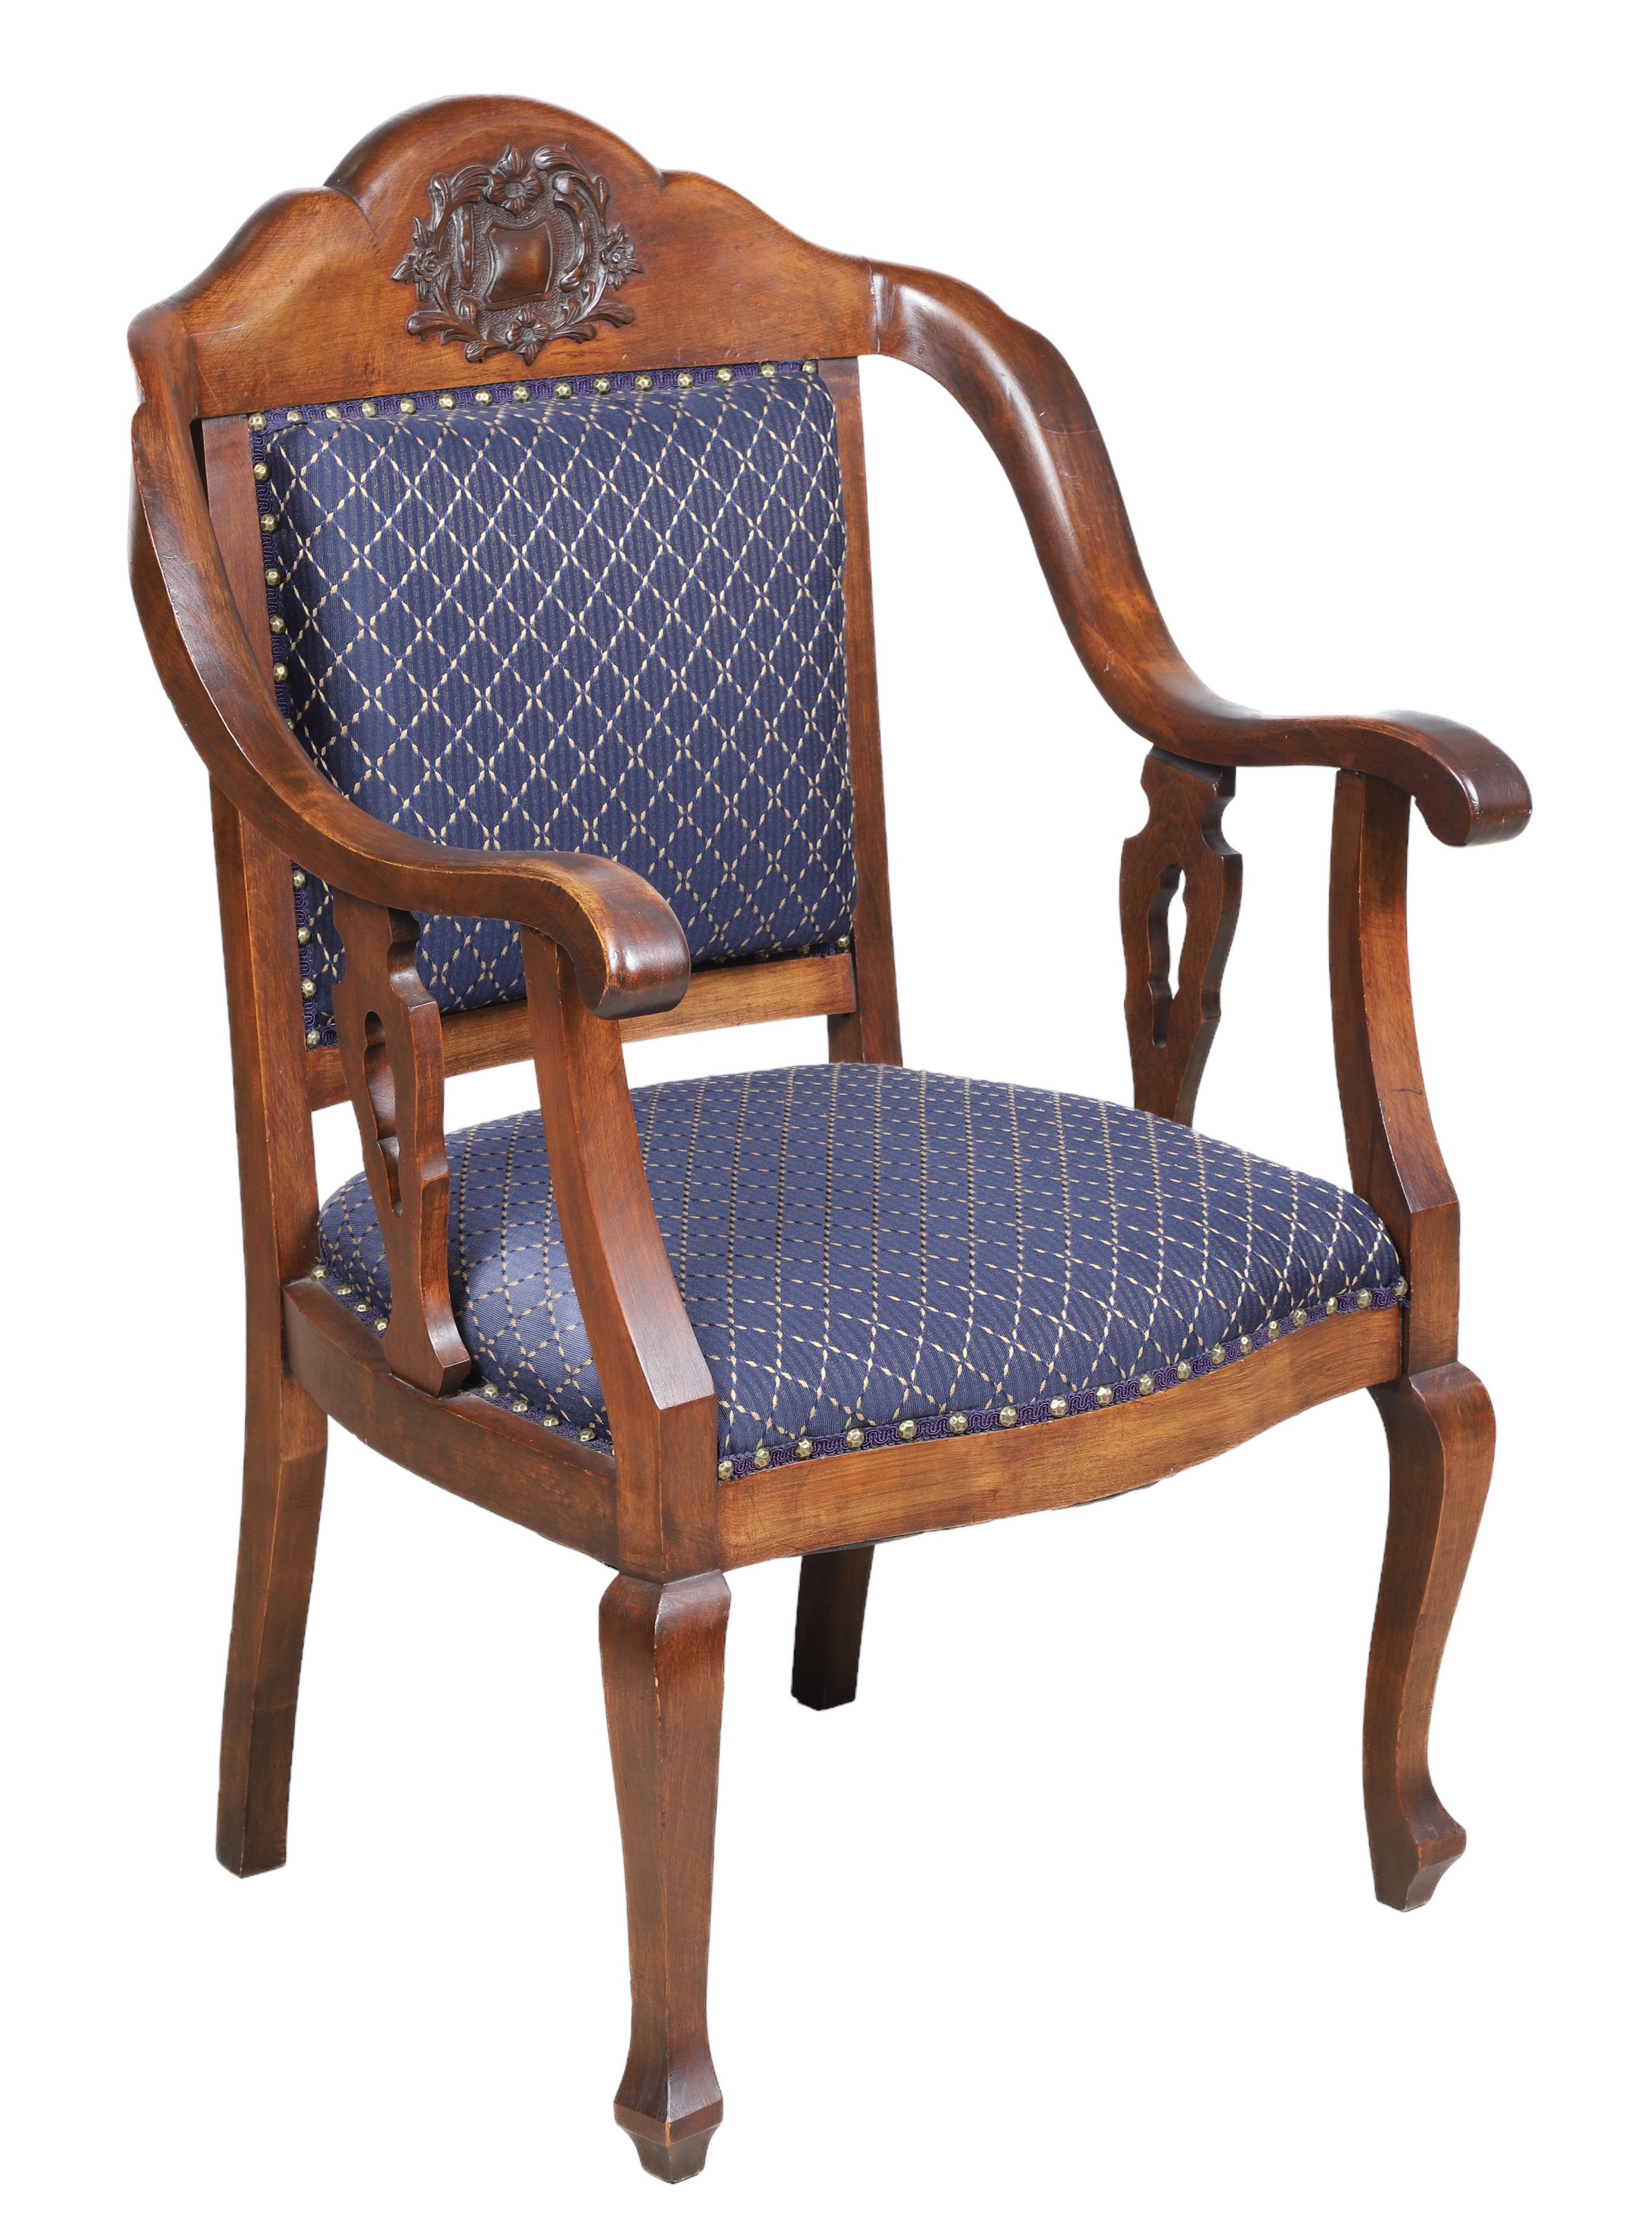 Carved mahogany open armchair  2e122c